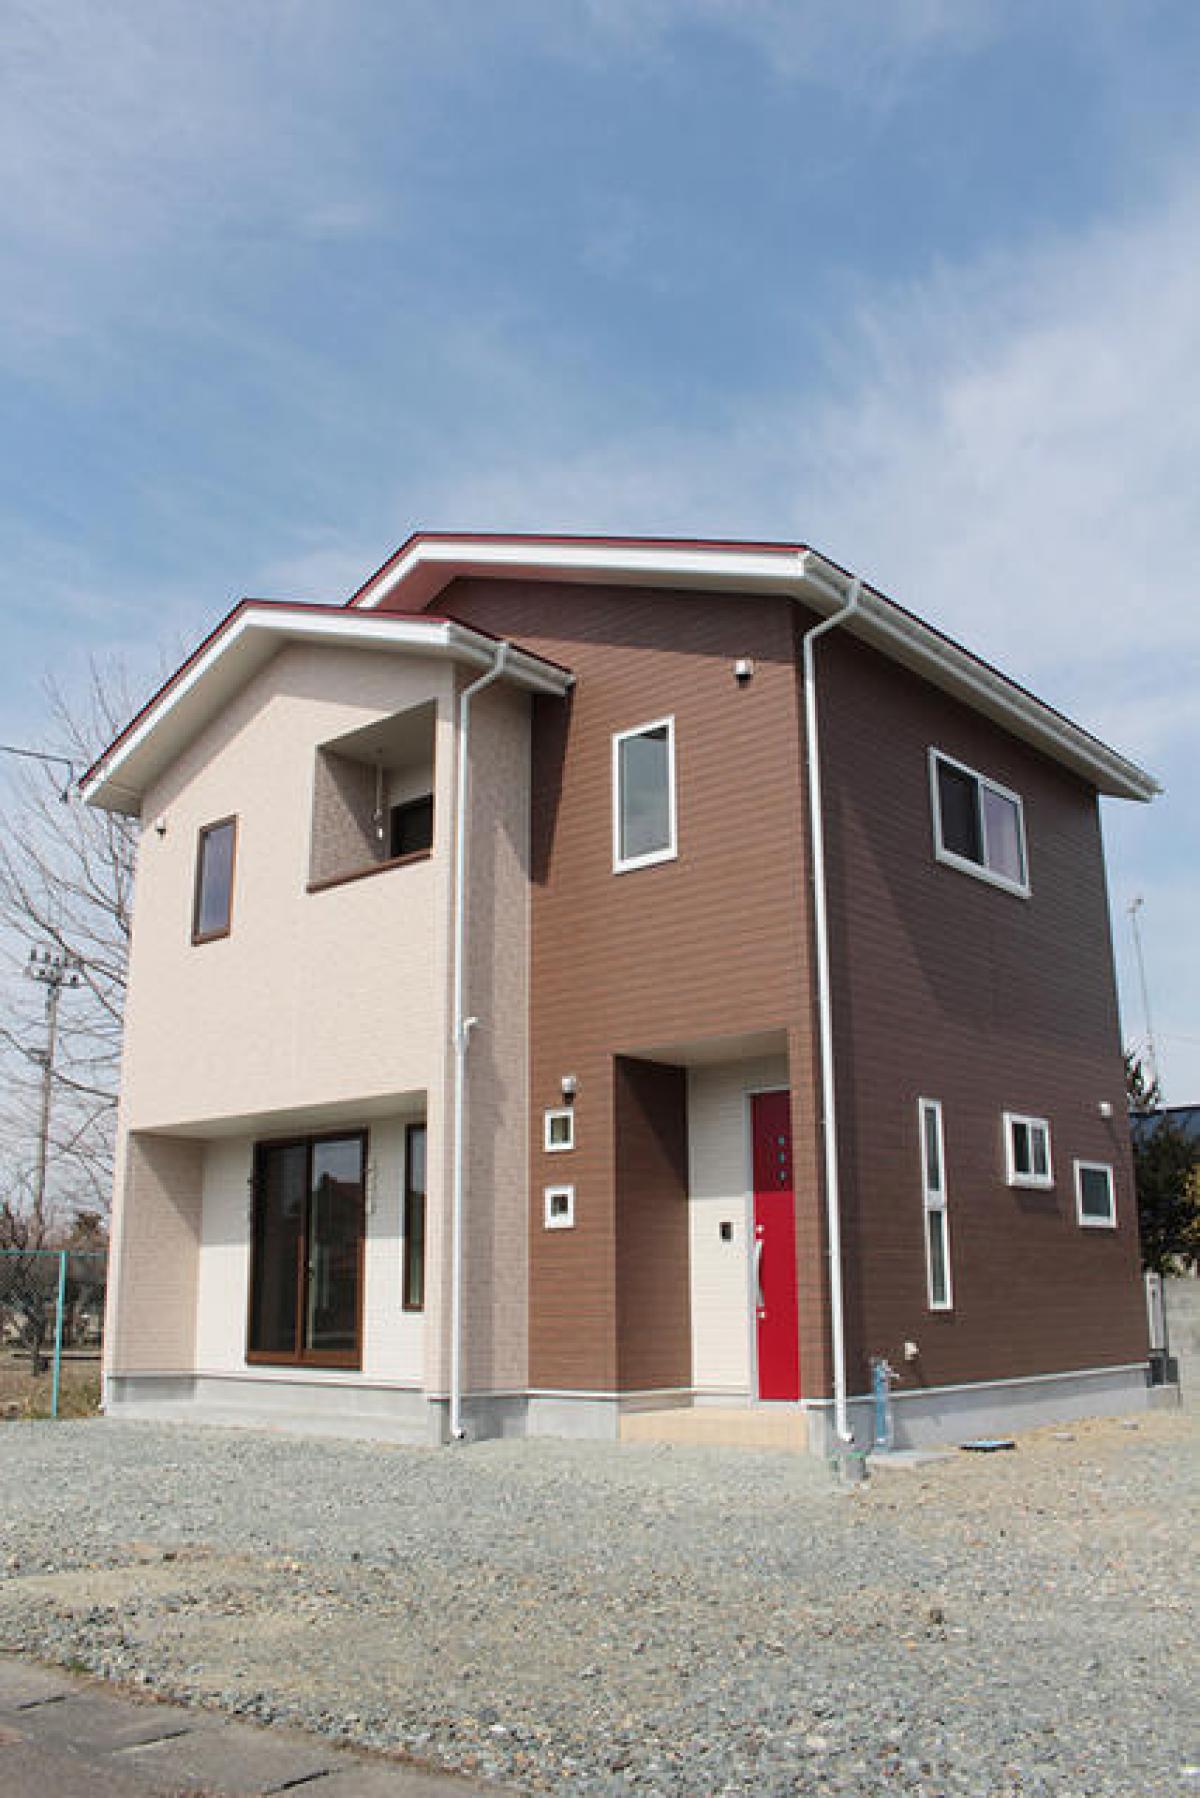 Picture of Home For Sale in Oshu Shi, Iwate, Japan